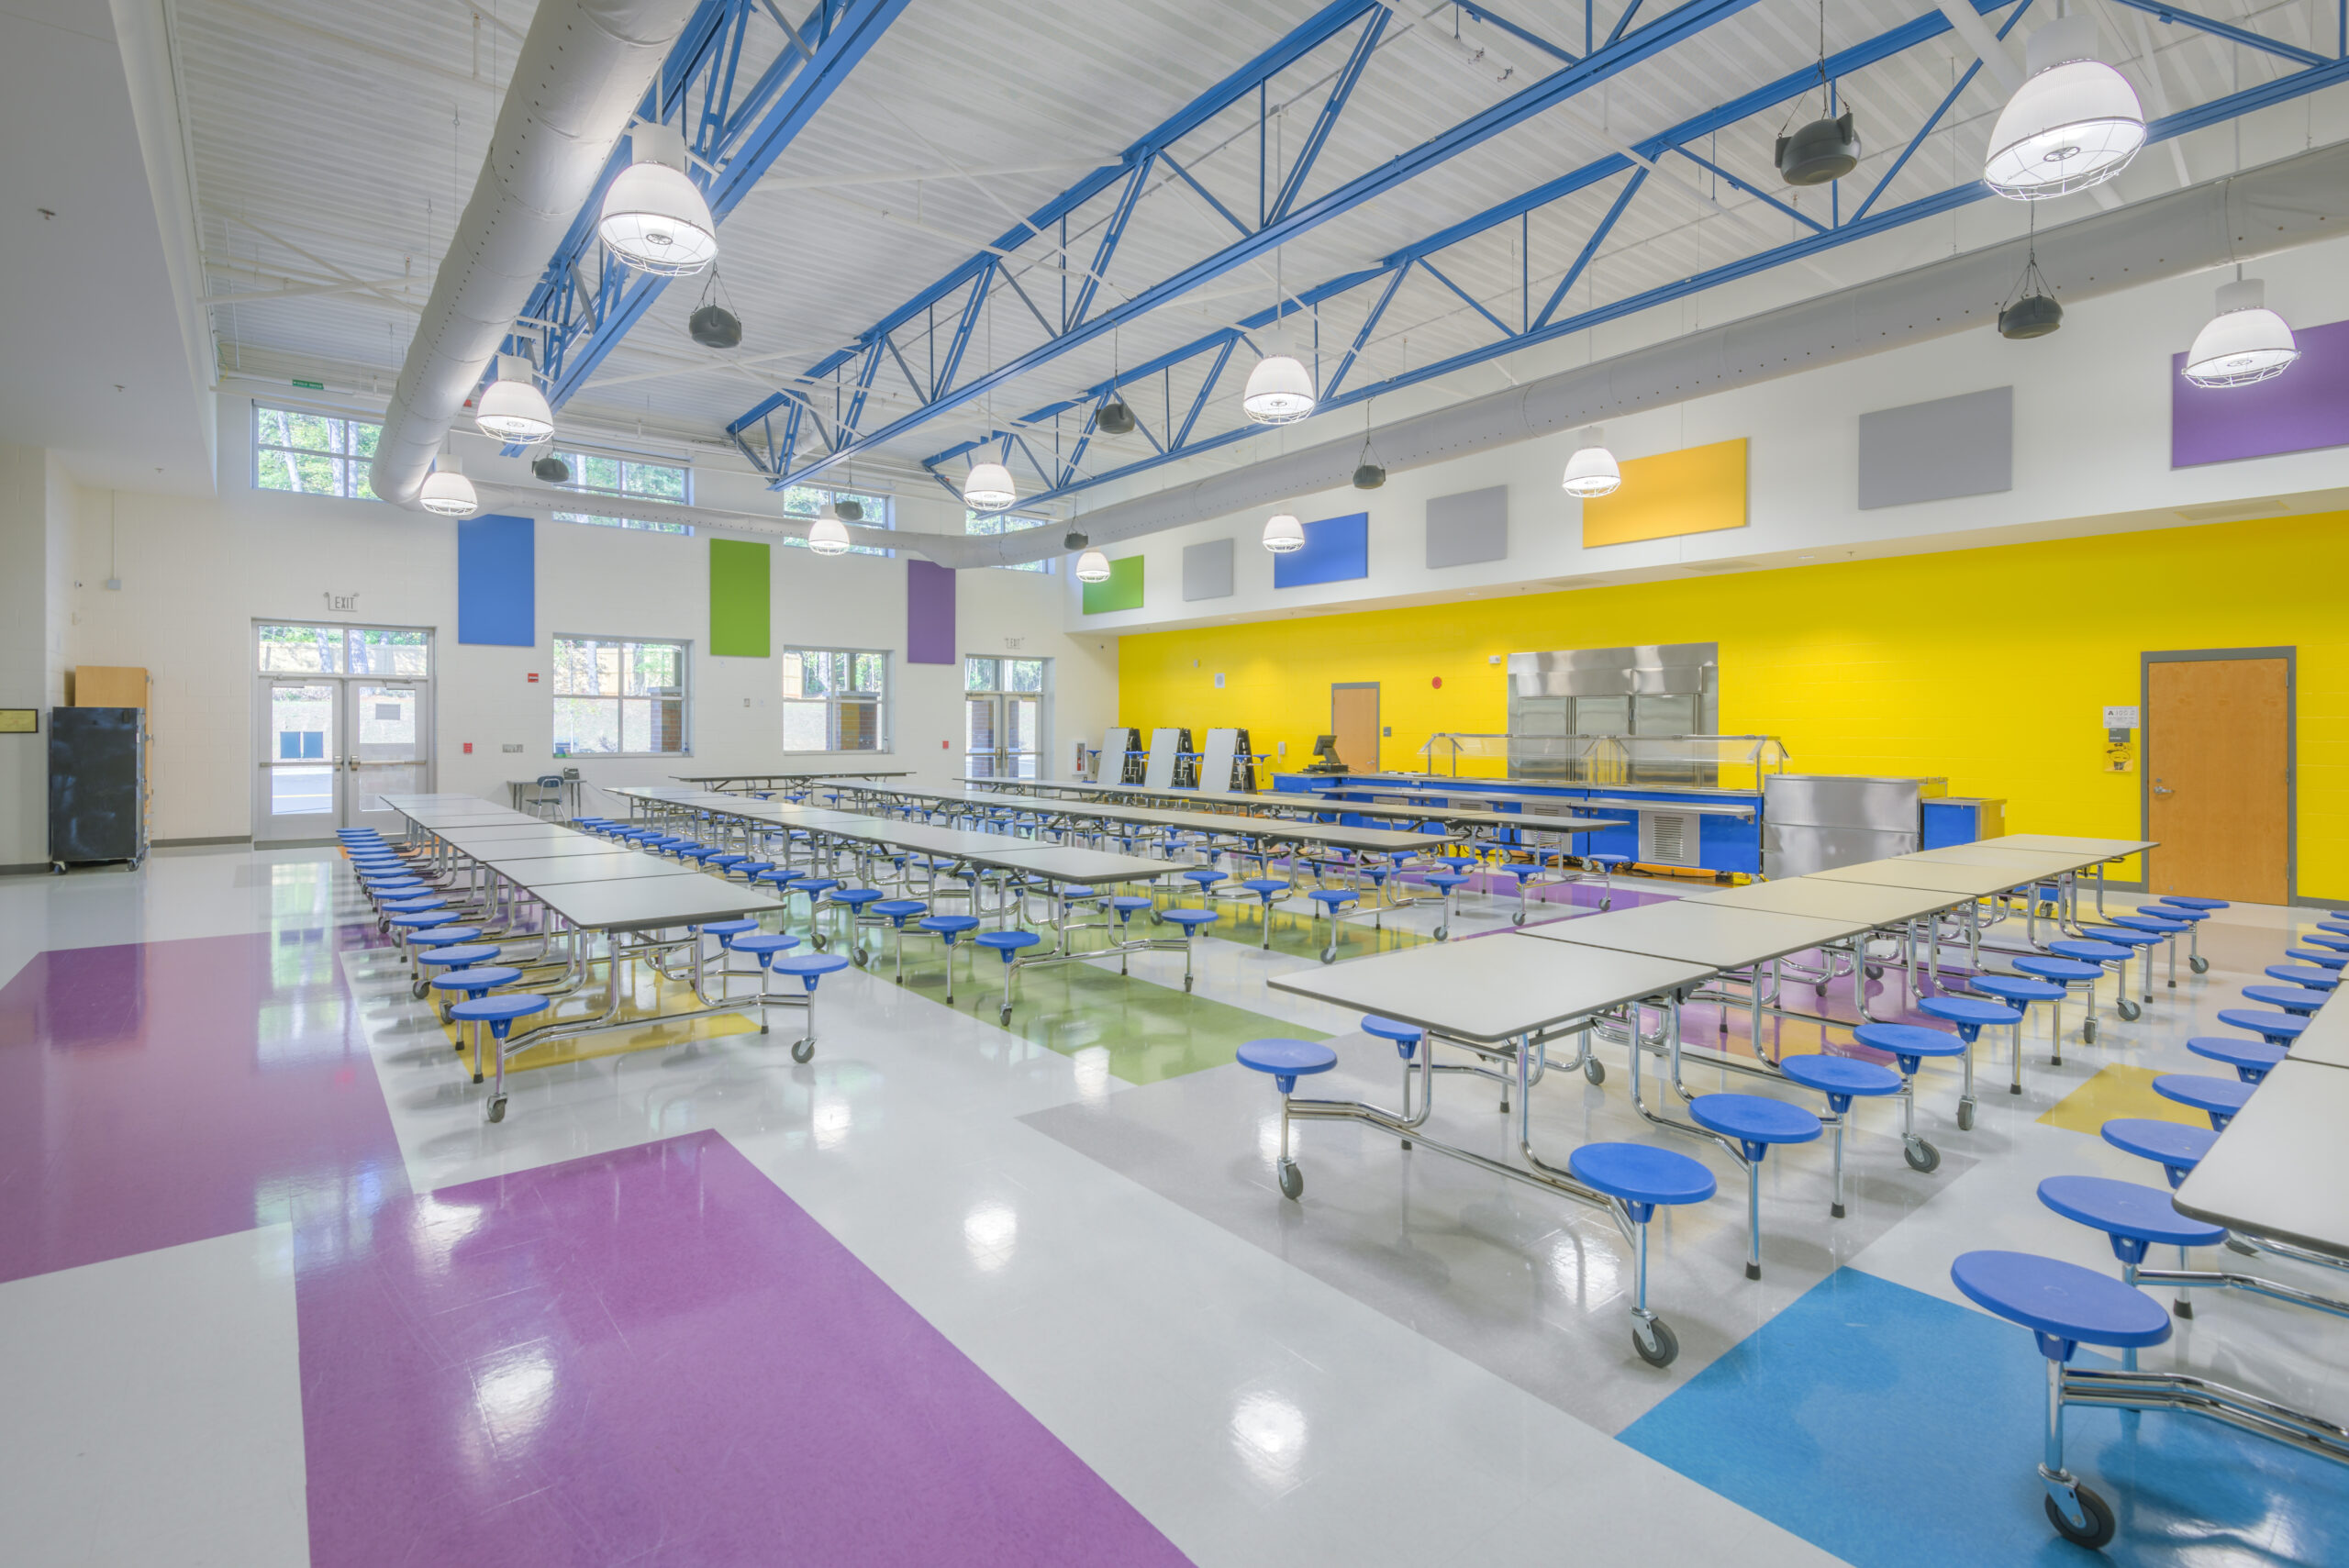 Barton Pond Elementary School Cafeteria with Blue Bar Joists, a Yellow Accent Wall, Foldable Lunch Tables with Attached Blue Stools, and a Serving Line